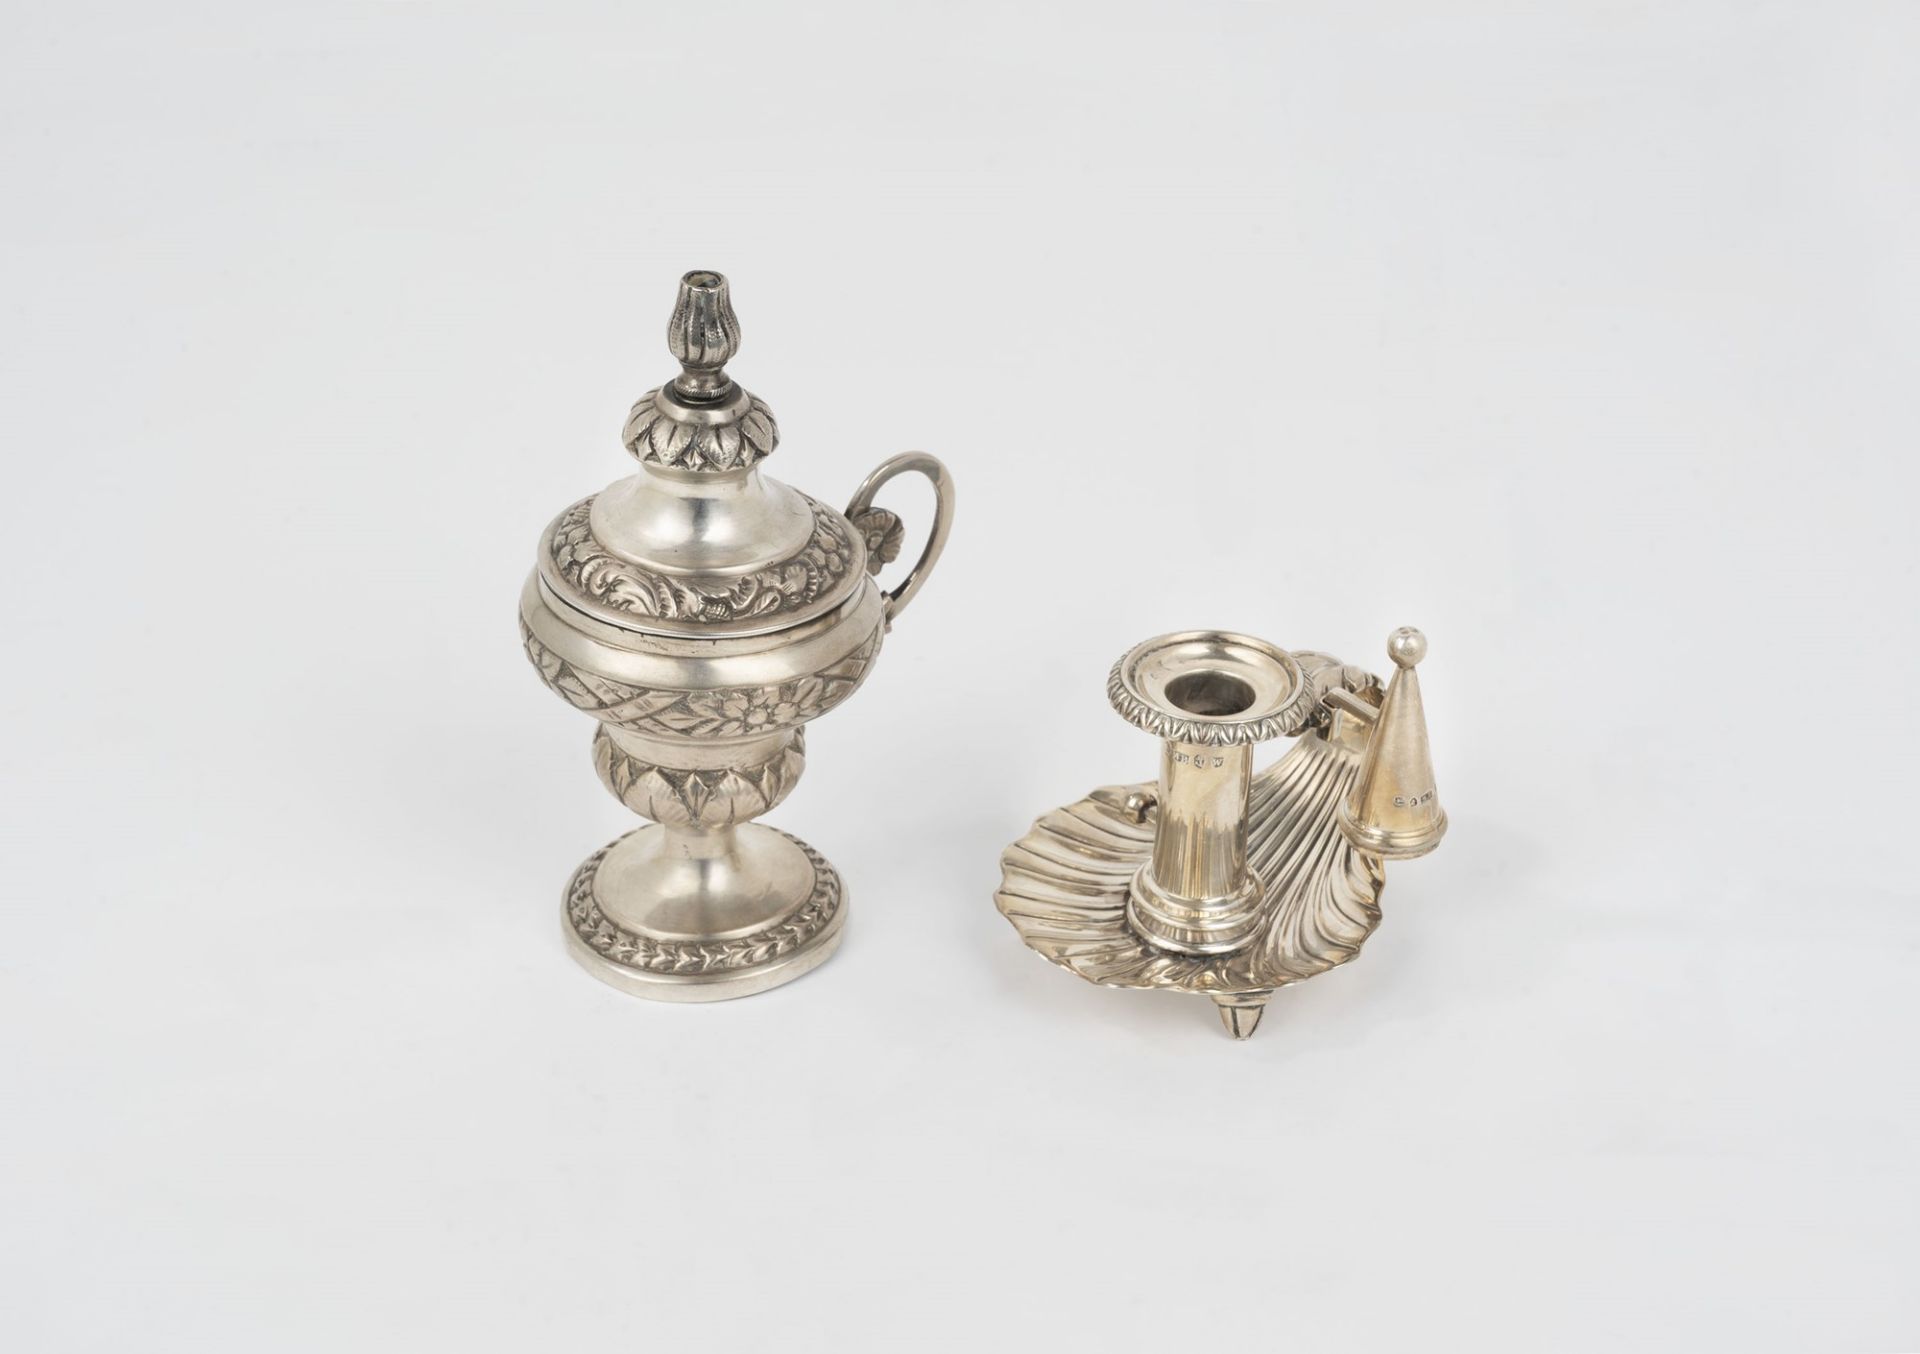 Silver candle holder and wick, 19th century